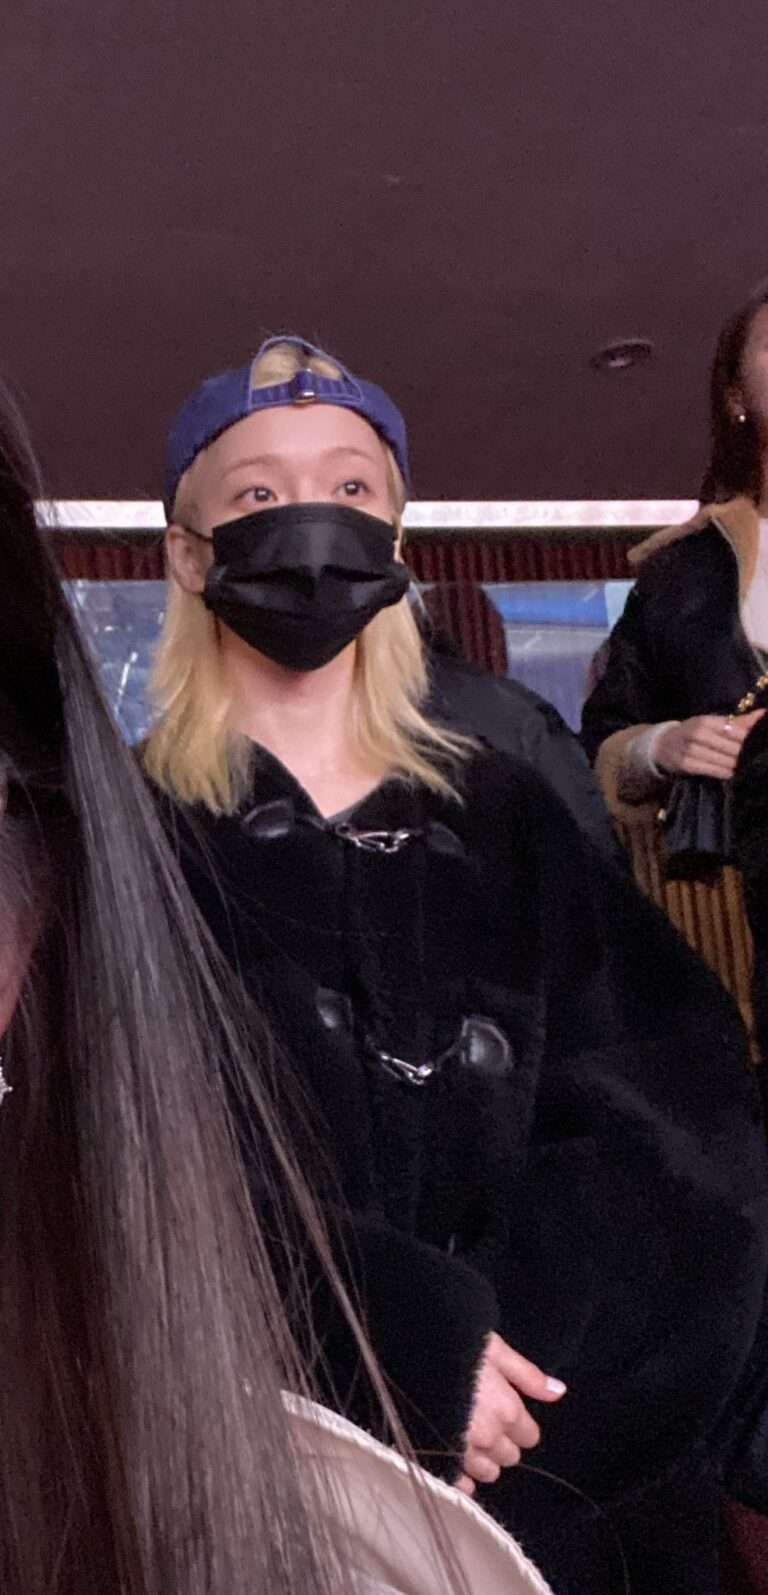 Winter went to ITZY's concert today